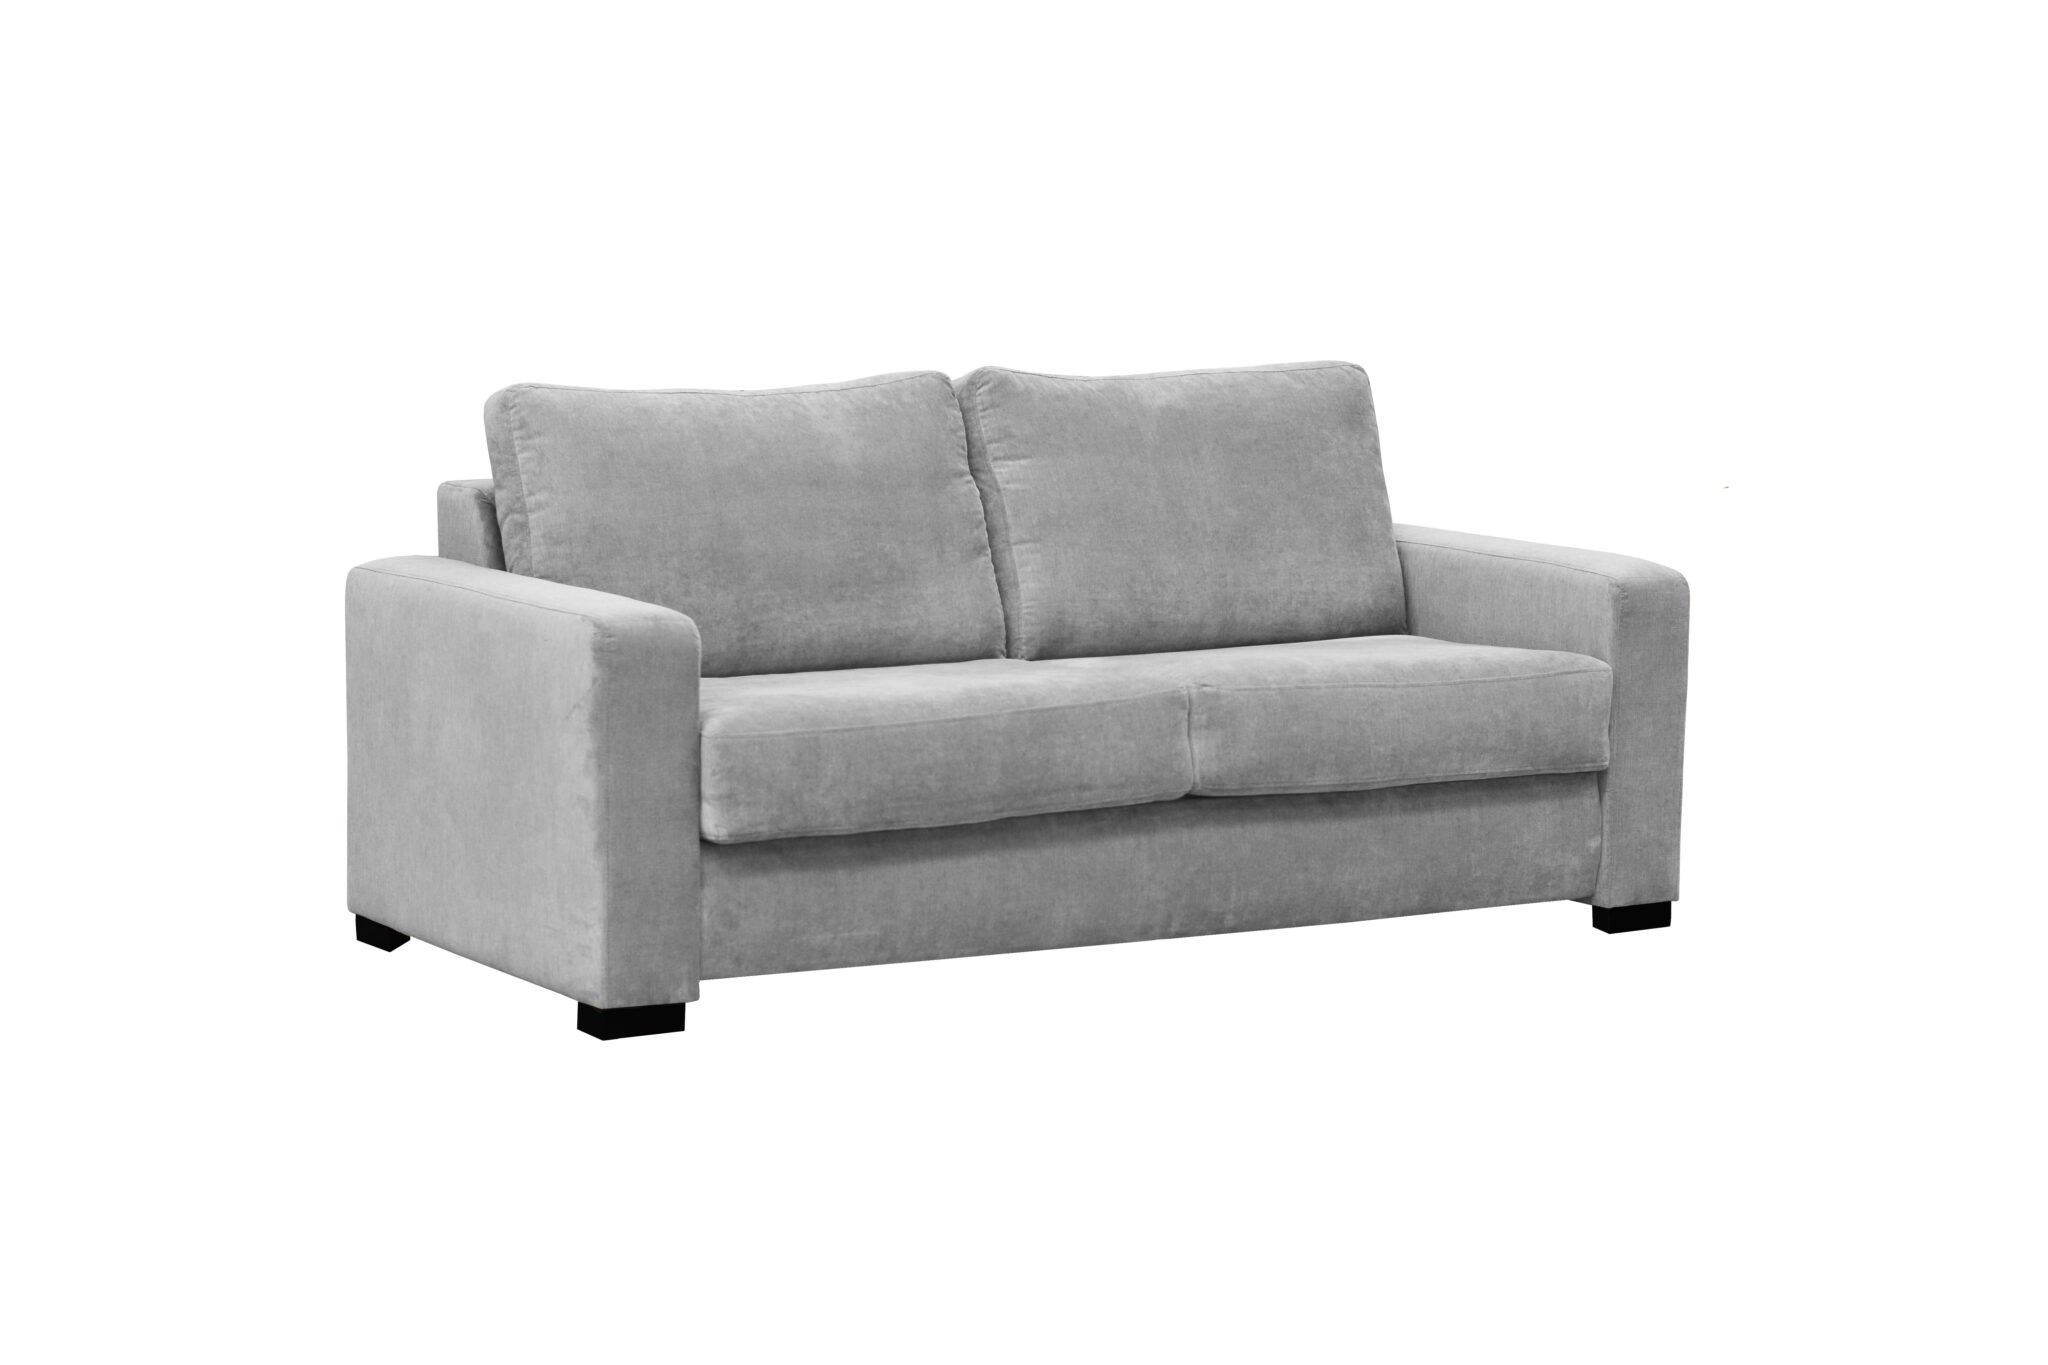 looking for a sofa bed barron's